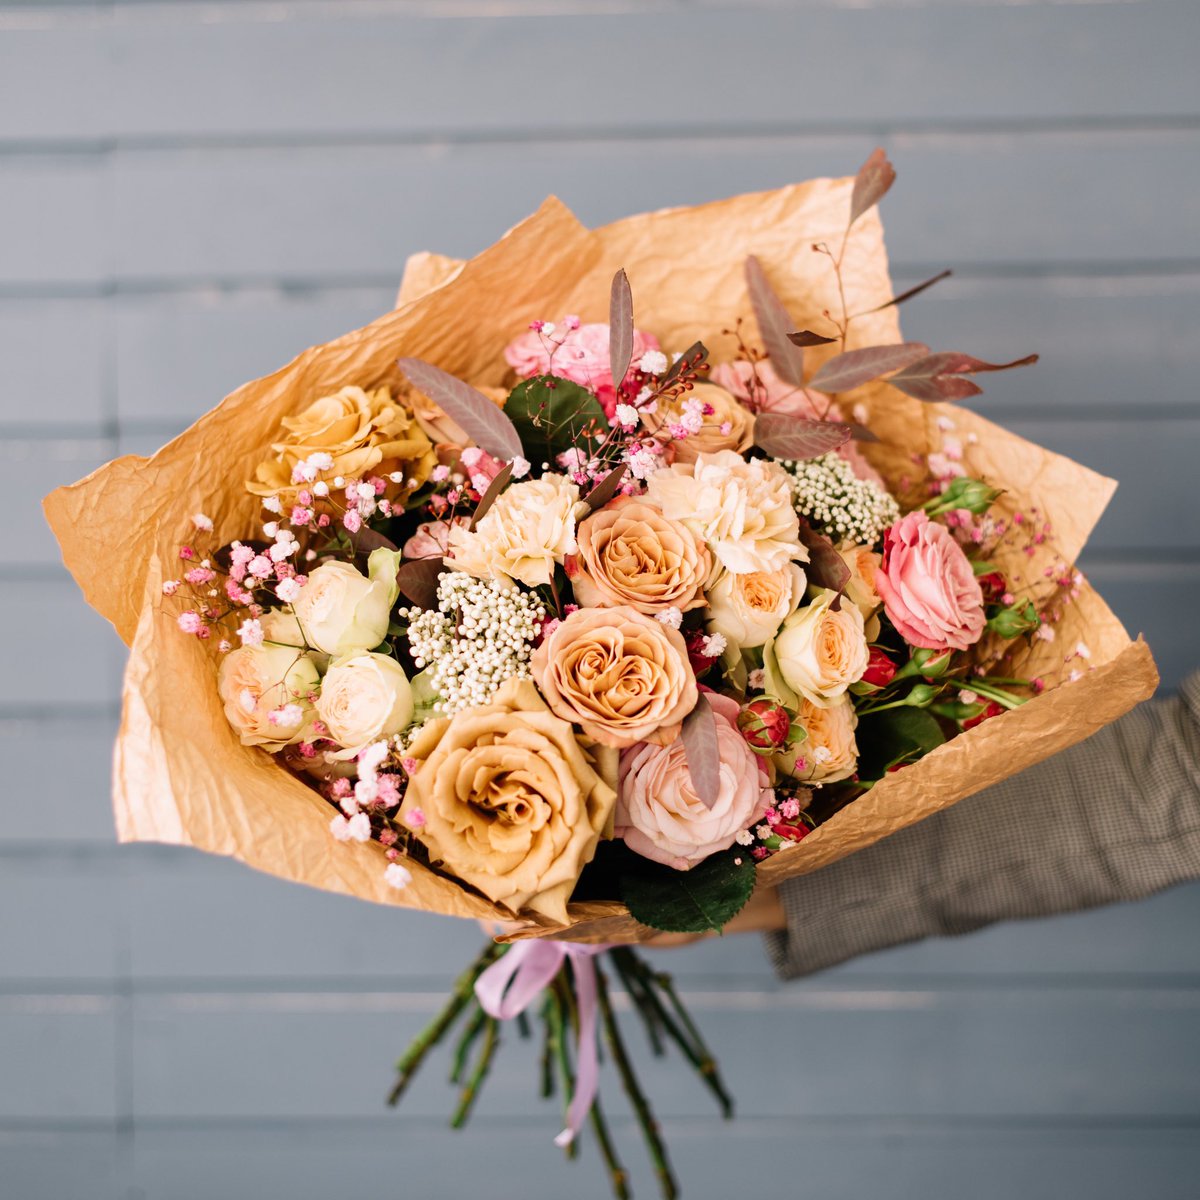 Happy Friday! I still get the Friday feelin’ even though the weekends are basically the same as during the week these days in terms of excitement 😅

#freshflowers #floralbouquet #floralsyourway #floralstories #floralstyling #bouquetoftheday #bouquetofflowers #roses #gypsophila